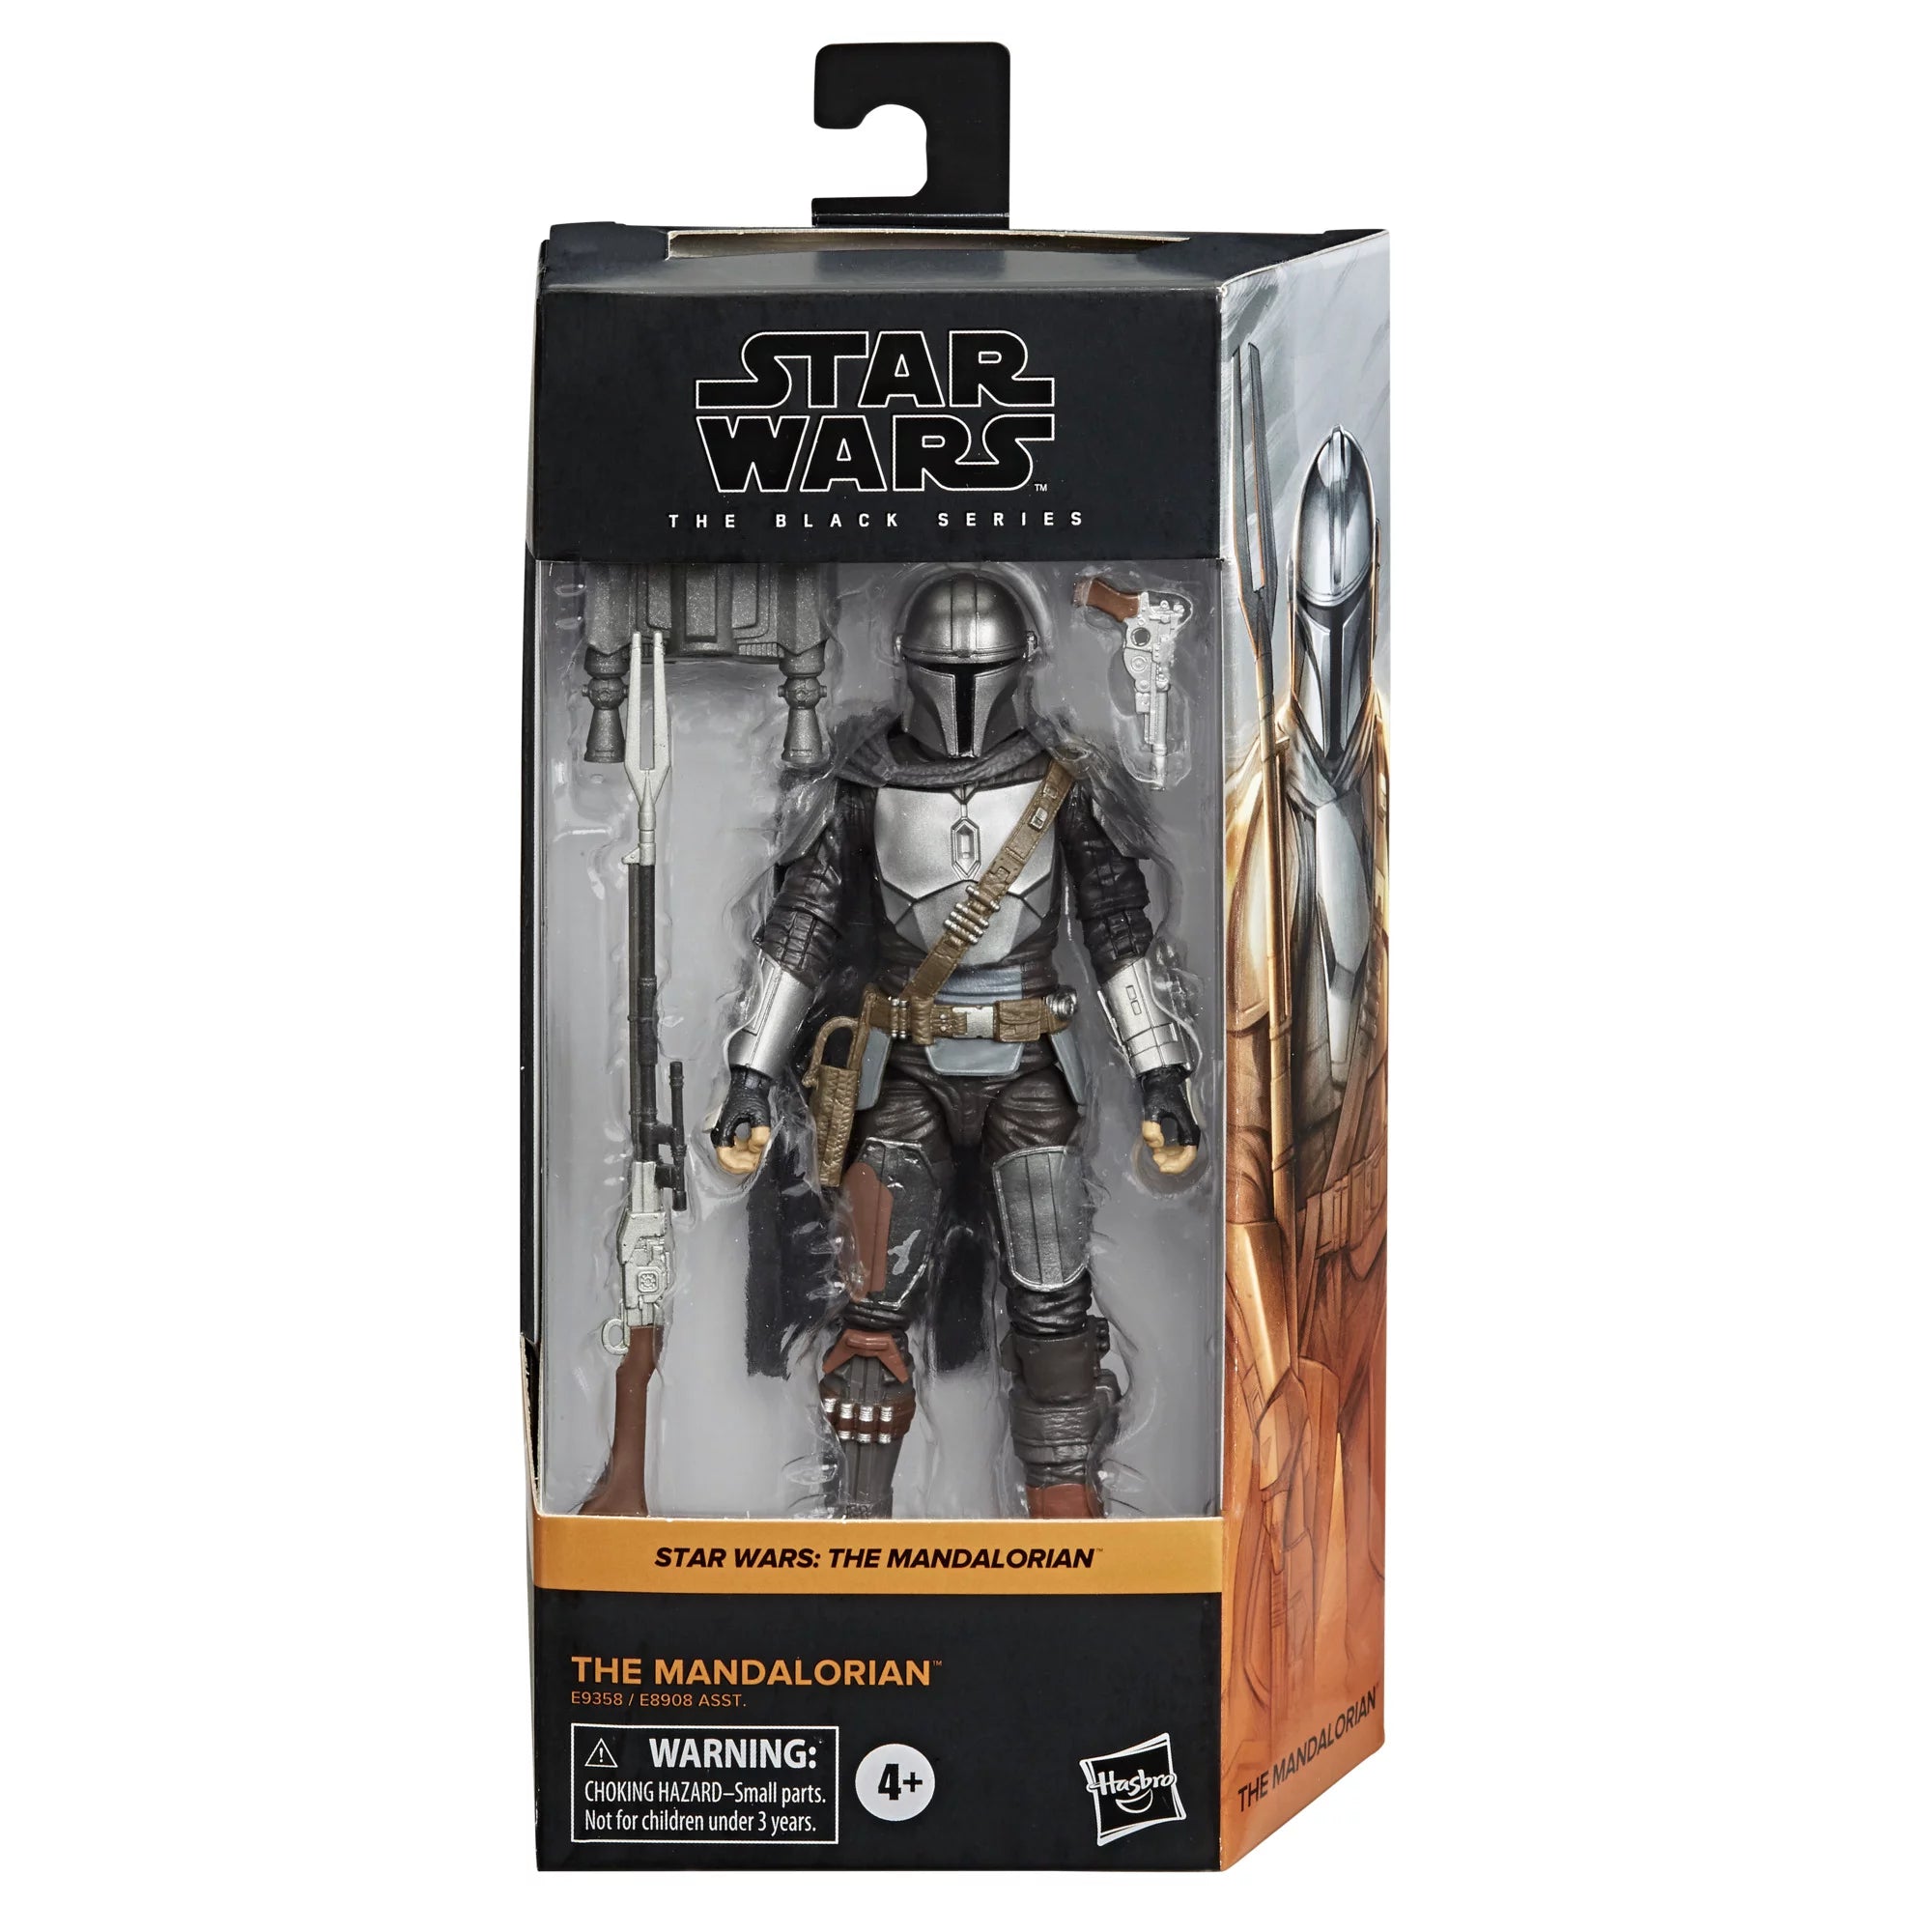 Star Wars The Black Series The Mandalorian Collectible Figure By Hasbro